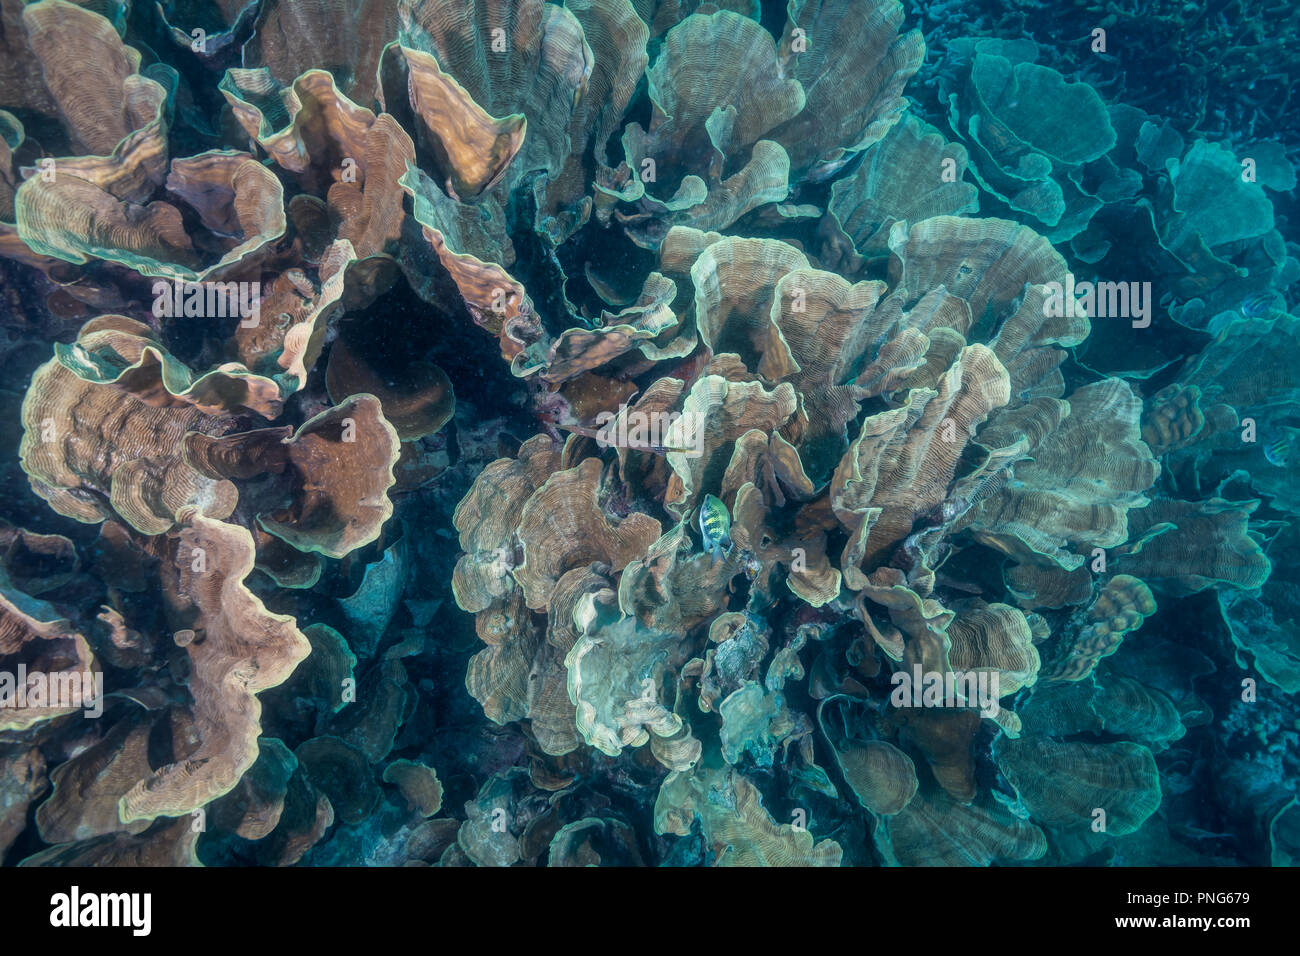 Very shallow coral reef covered with cabbage coral (Turbinaria sp.). Yap island Federated States of Micronesia Stock Photo